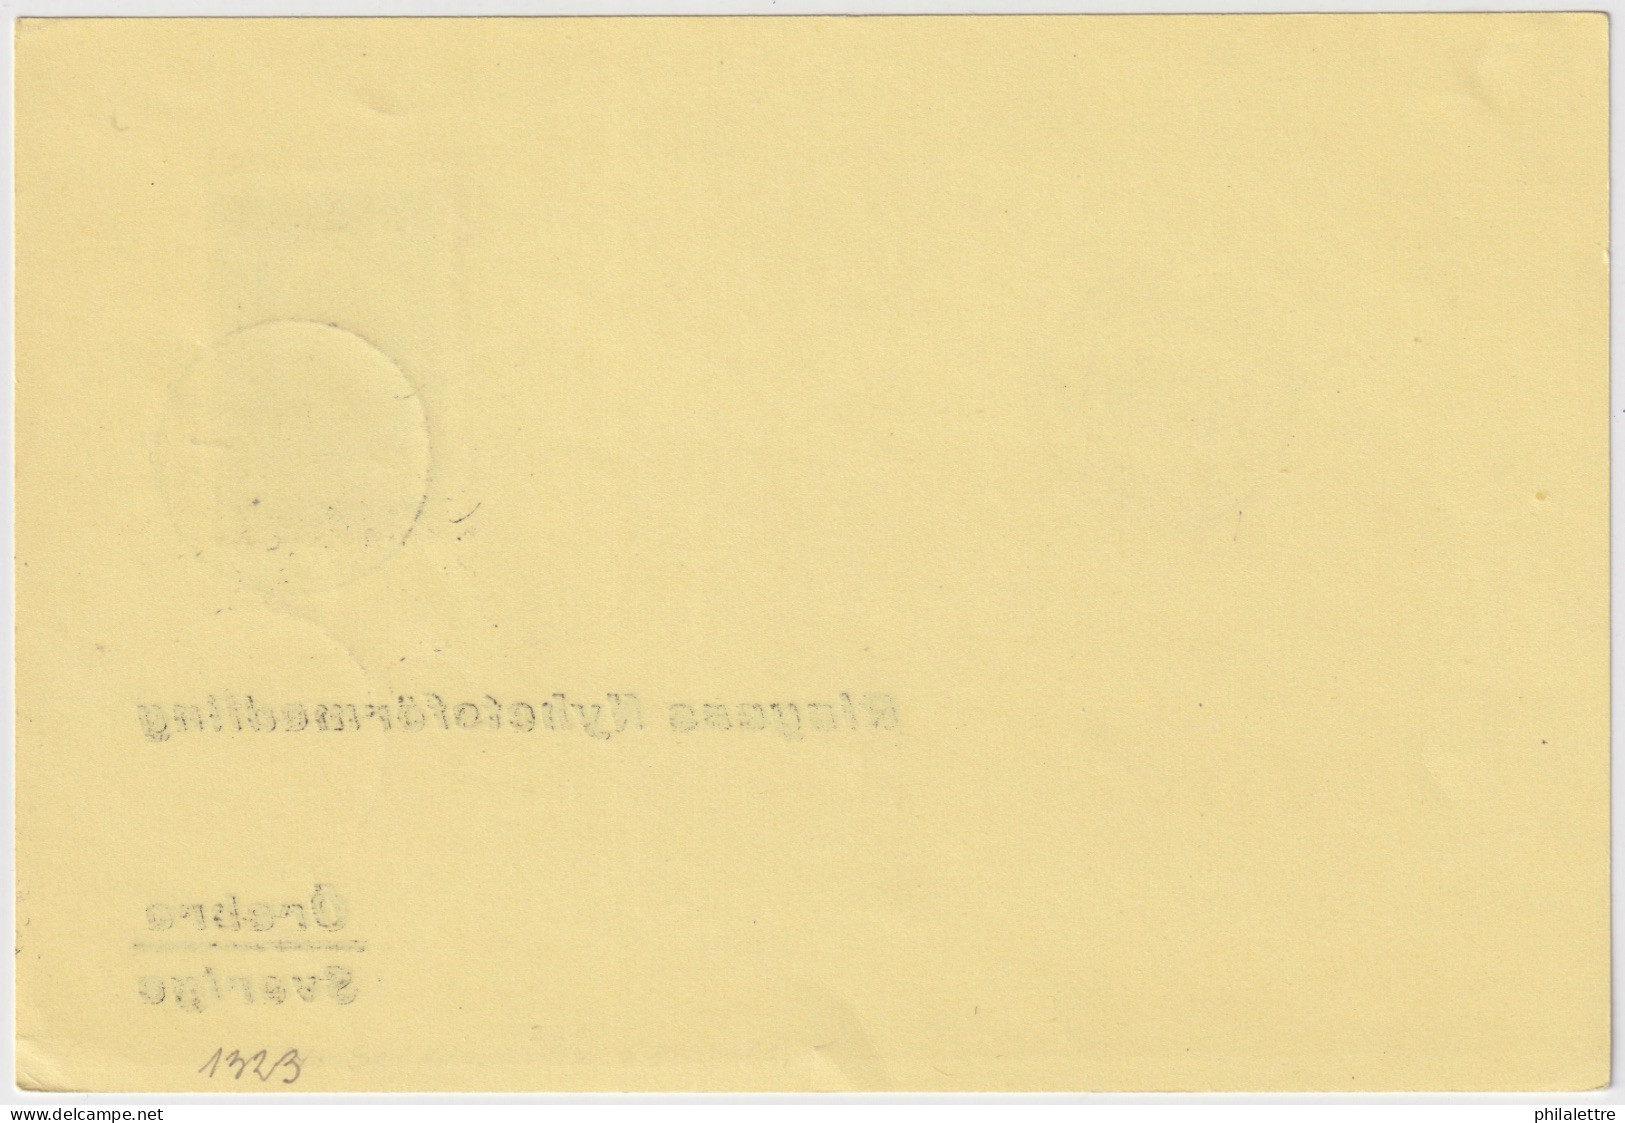 FINLAND - 1944 - Facit F288 3.50M Pdt Svinhufvud On First Day Card From Helsinki To Örebro, Sweden (Censored) - FDC